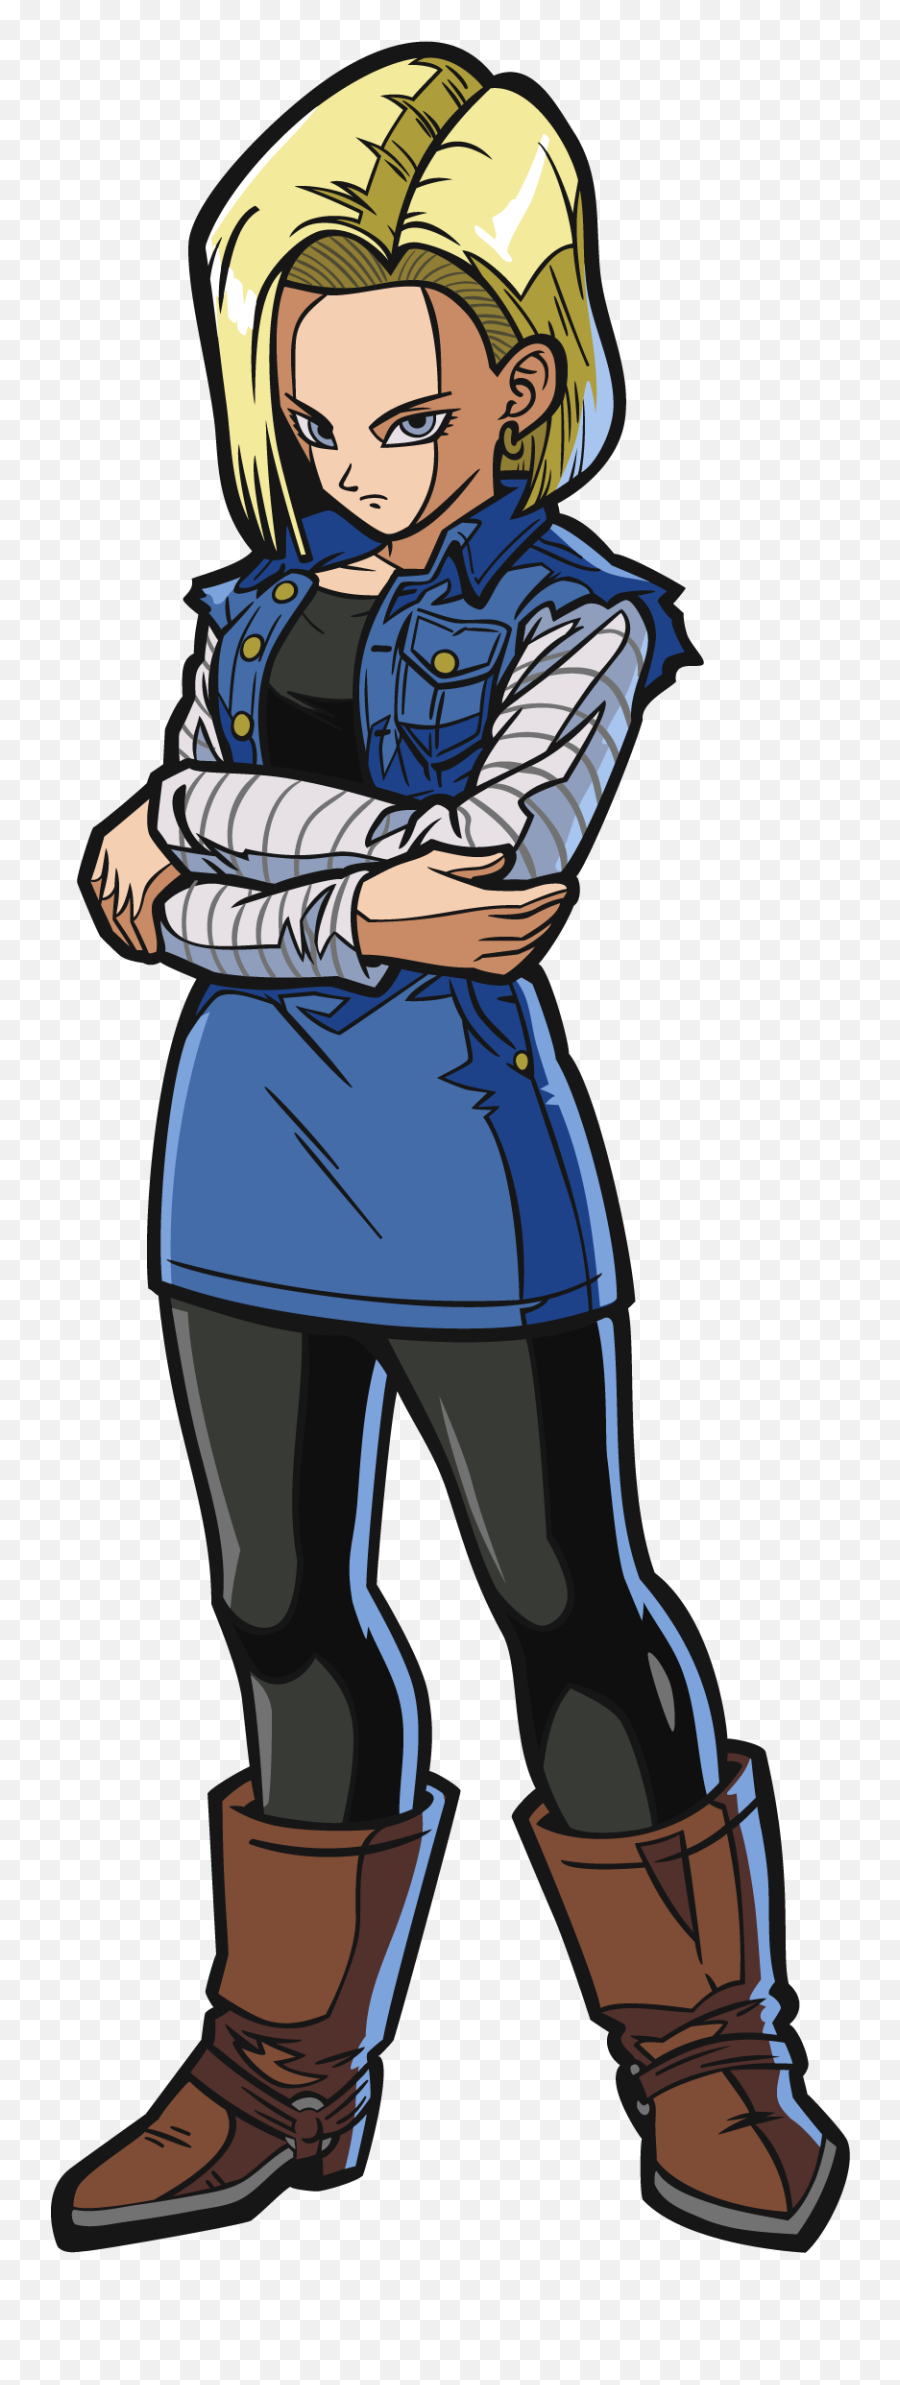 Android 18 - Dragon Ball Fighterz Android 18 Thick Emoji,Android 18 Png